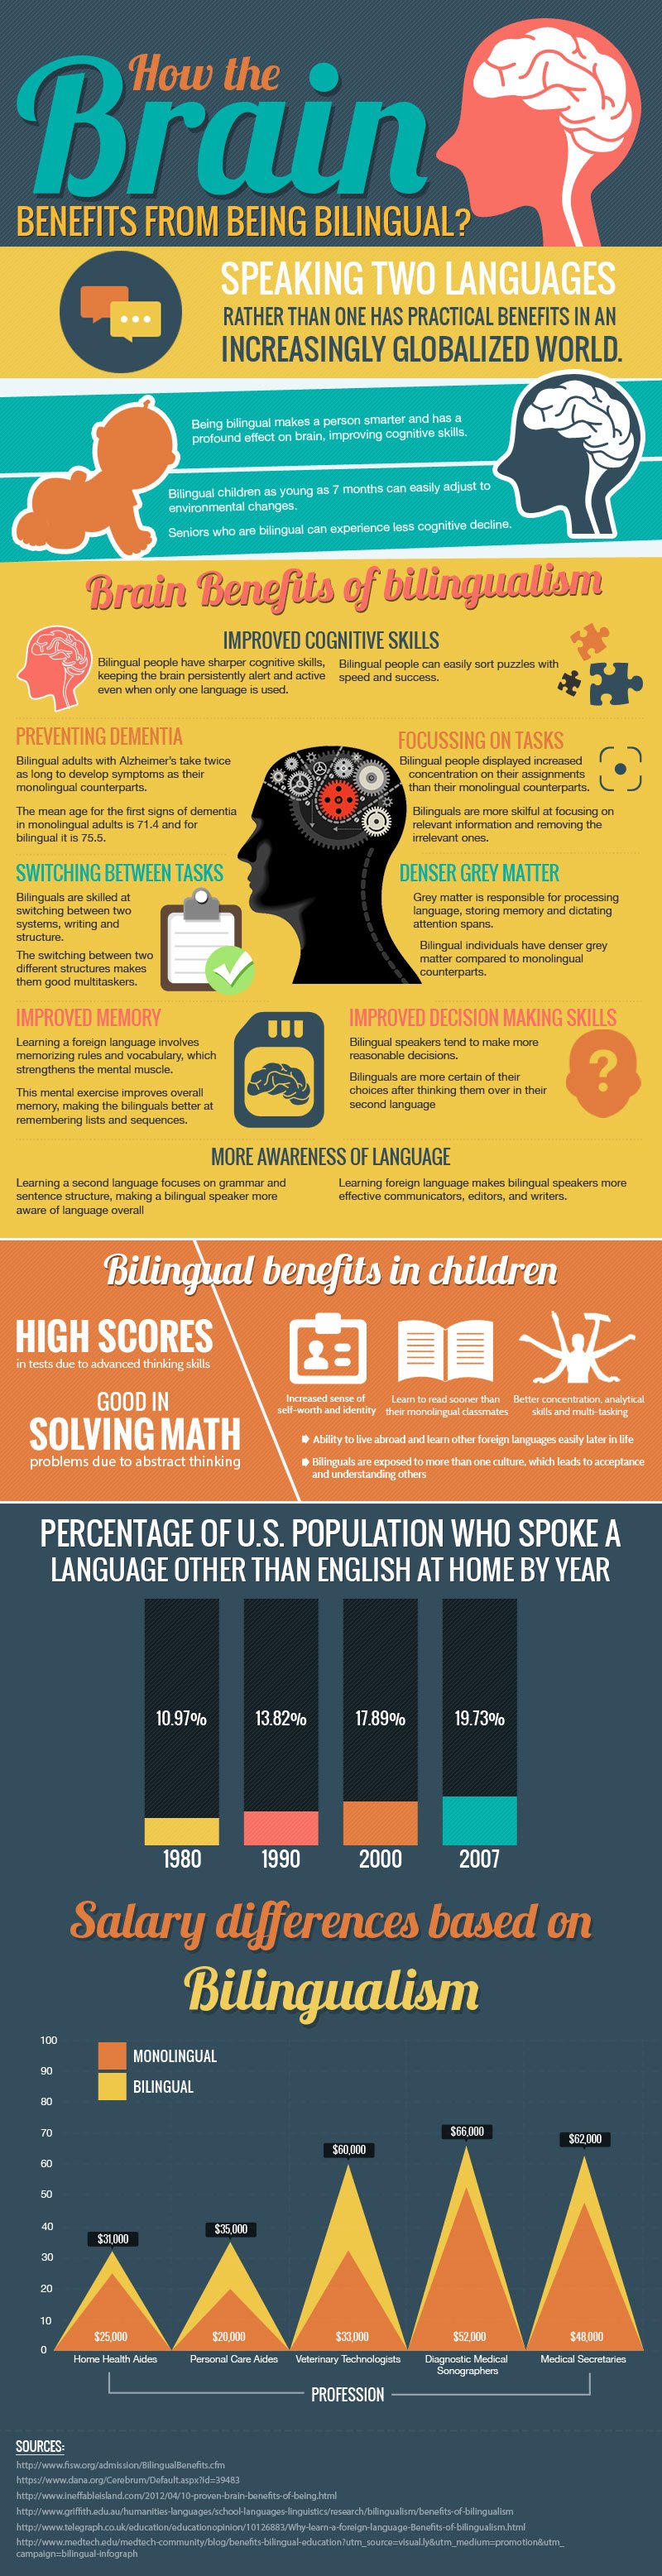 How the Brain Benefits from Being Bilingual Infographic